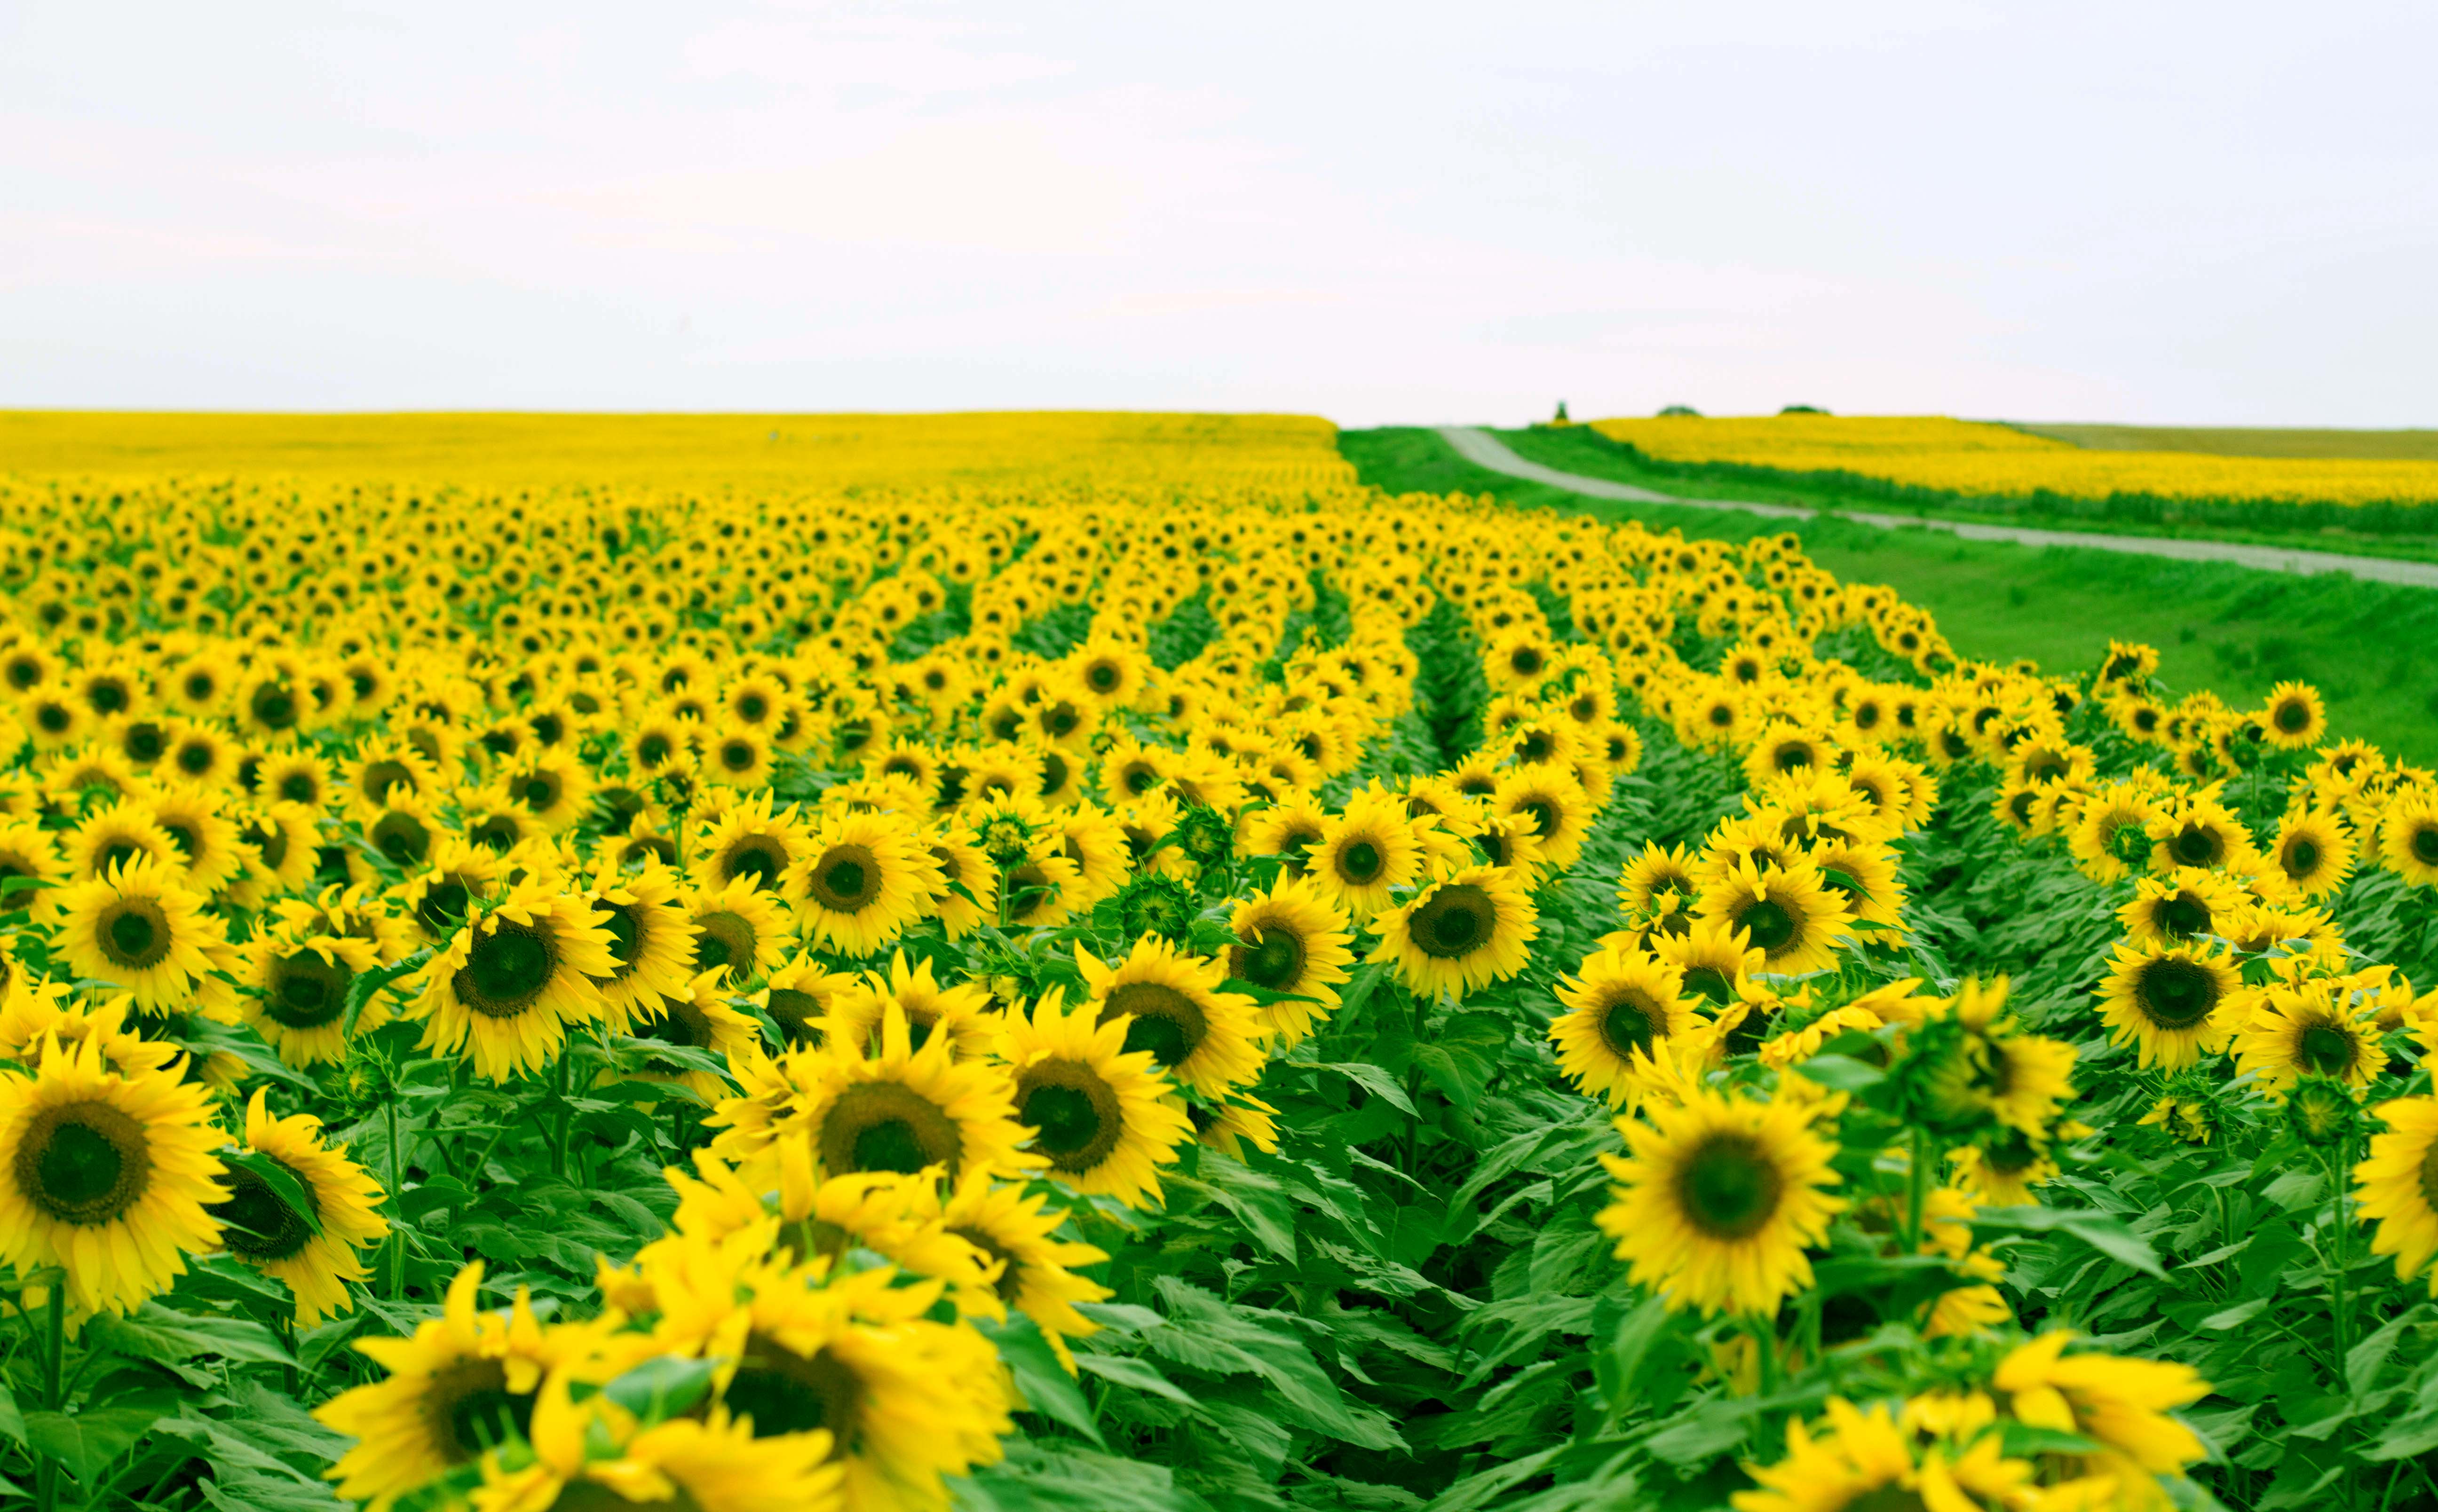 A large field of sunflowers with some green grass - Farm